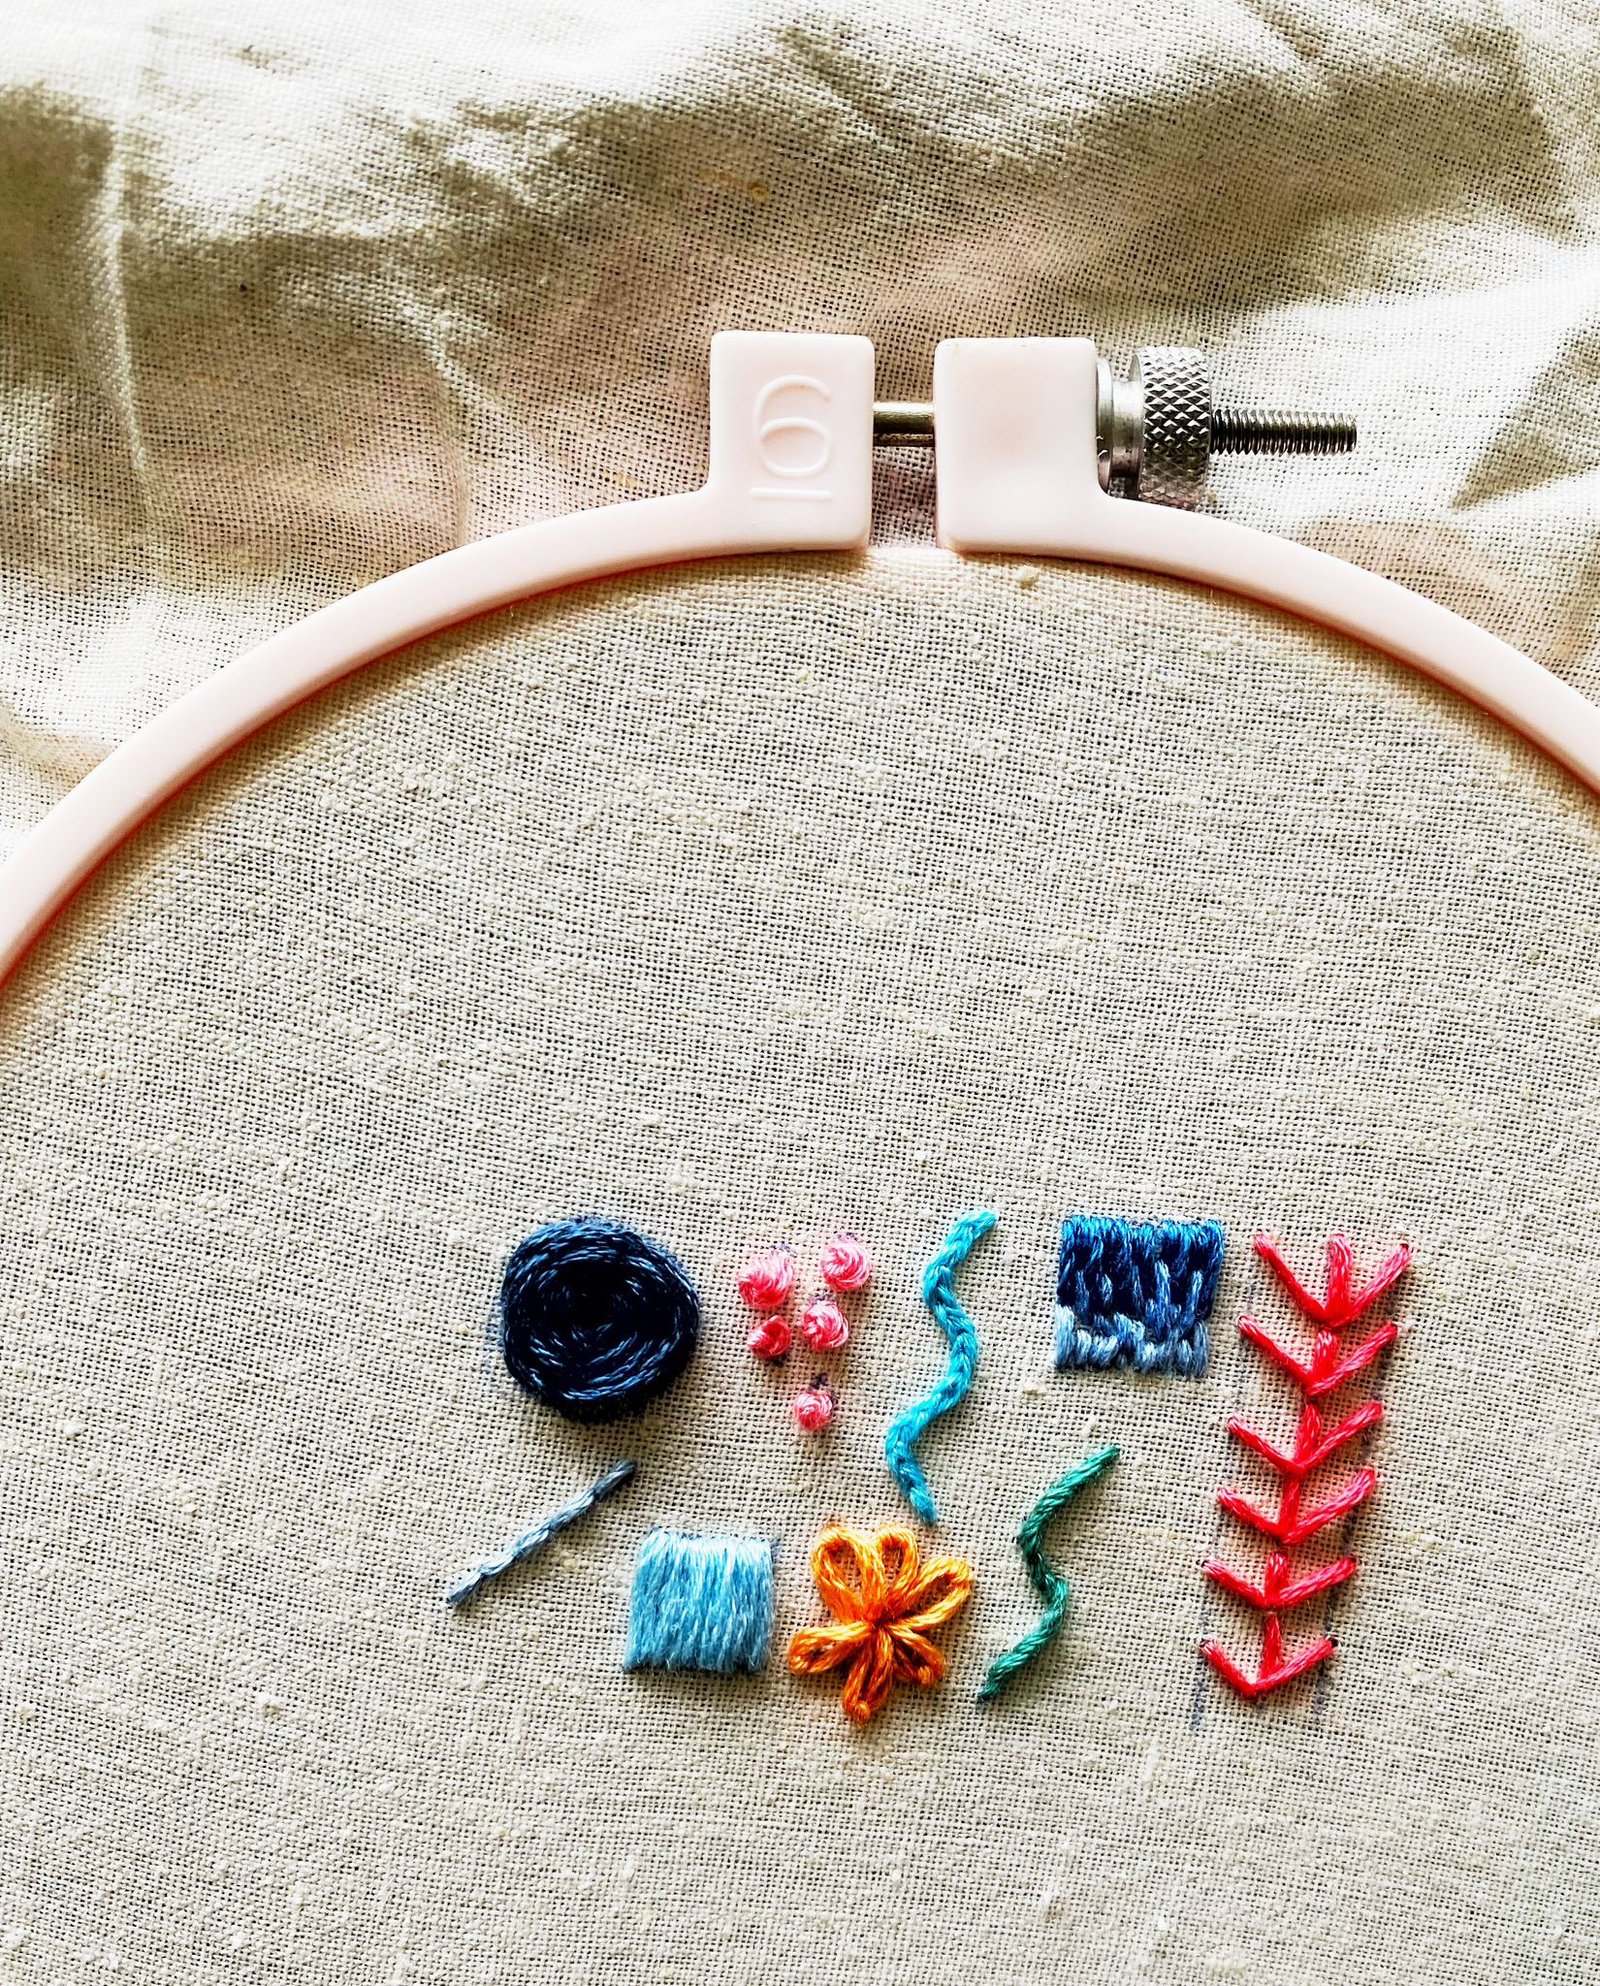 9 Embroidery Stitches for Beginners with Free Pattern - Missy Kate ...